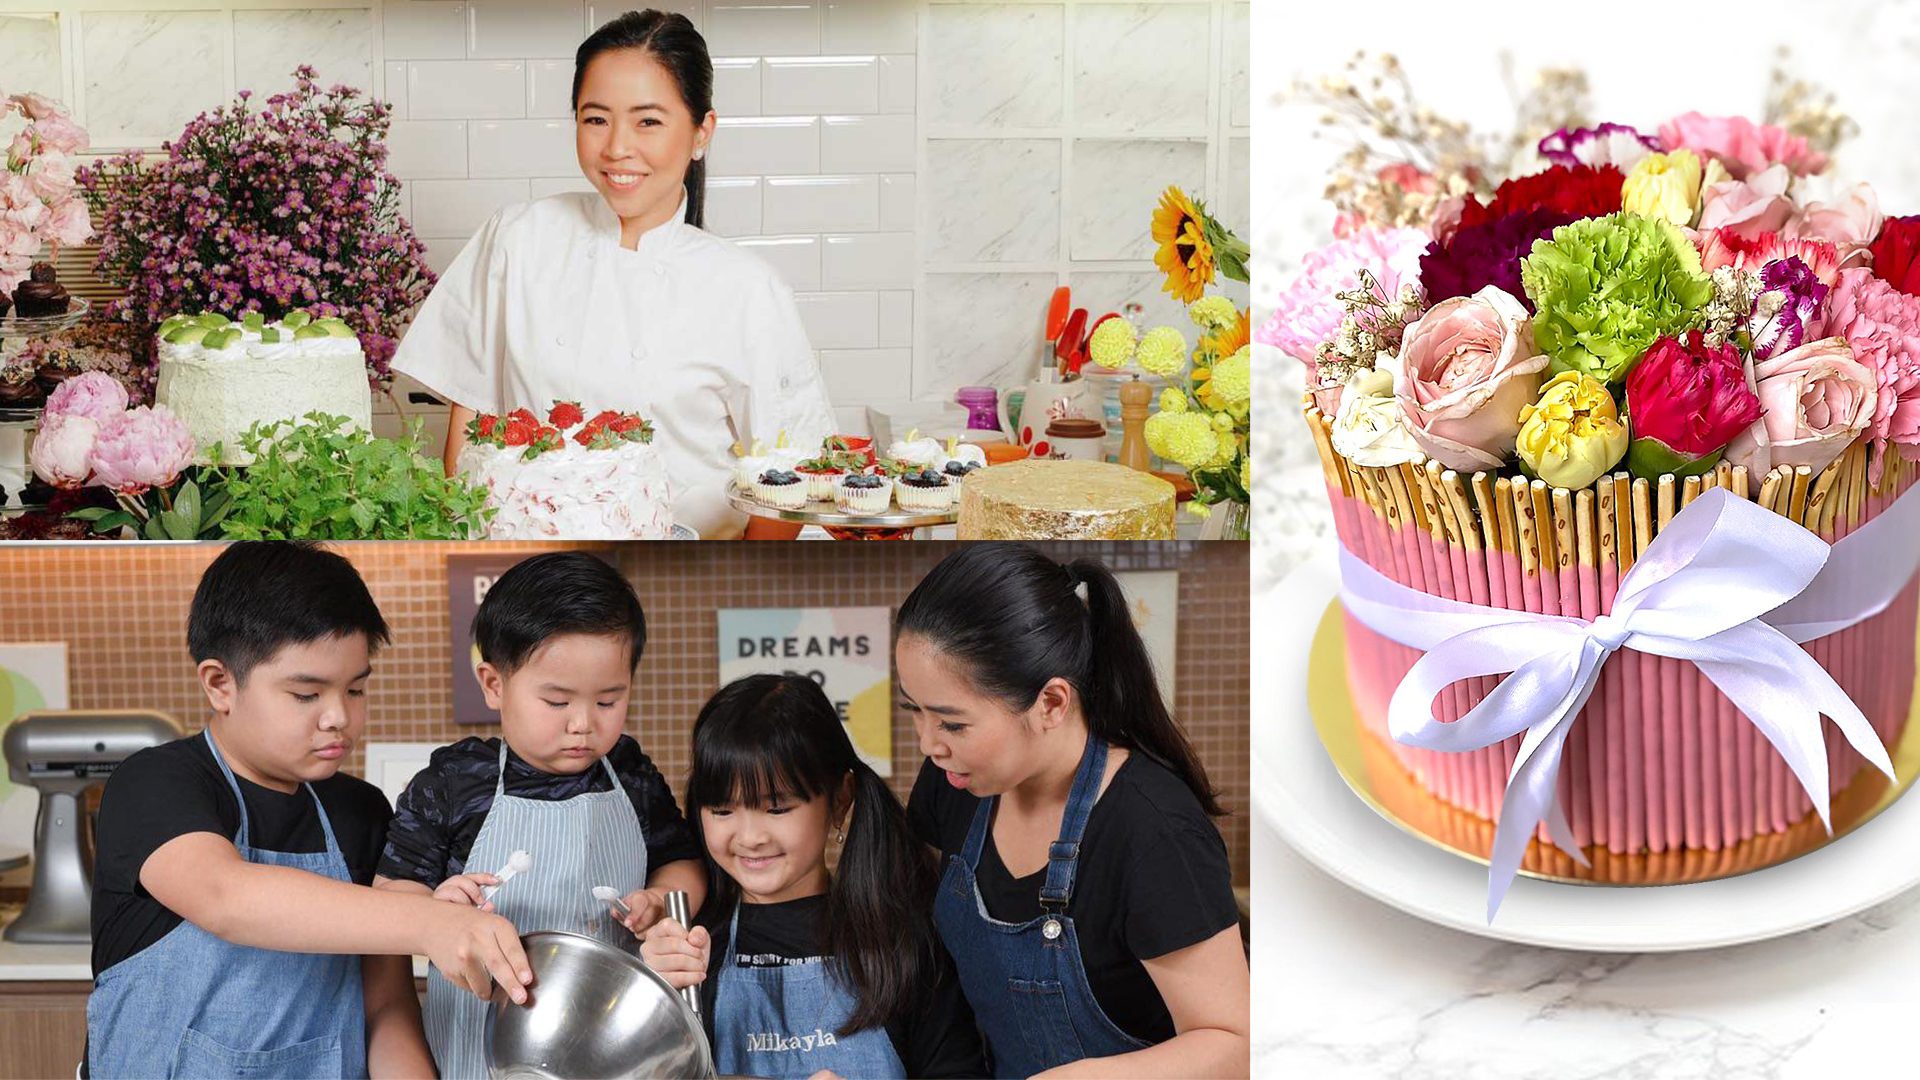 This mom of 3 bakes luxury cakes from her home basement